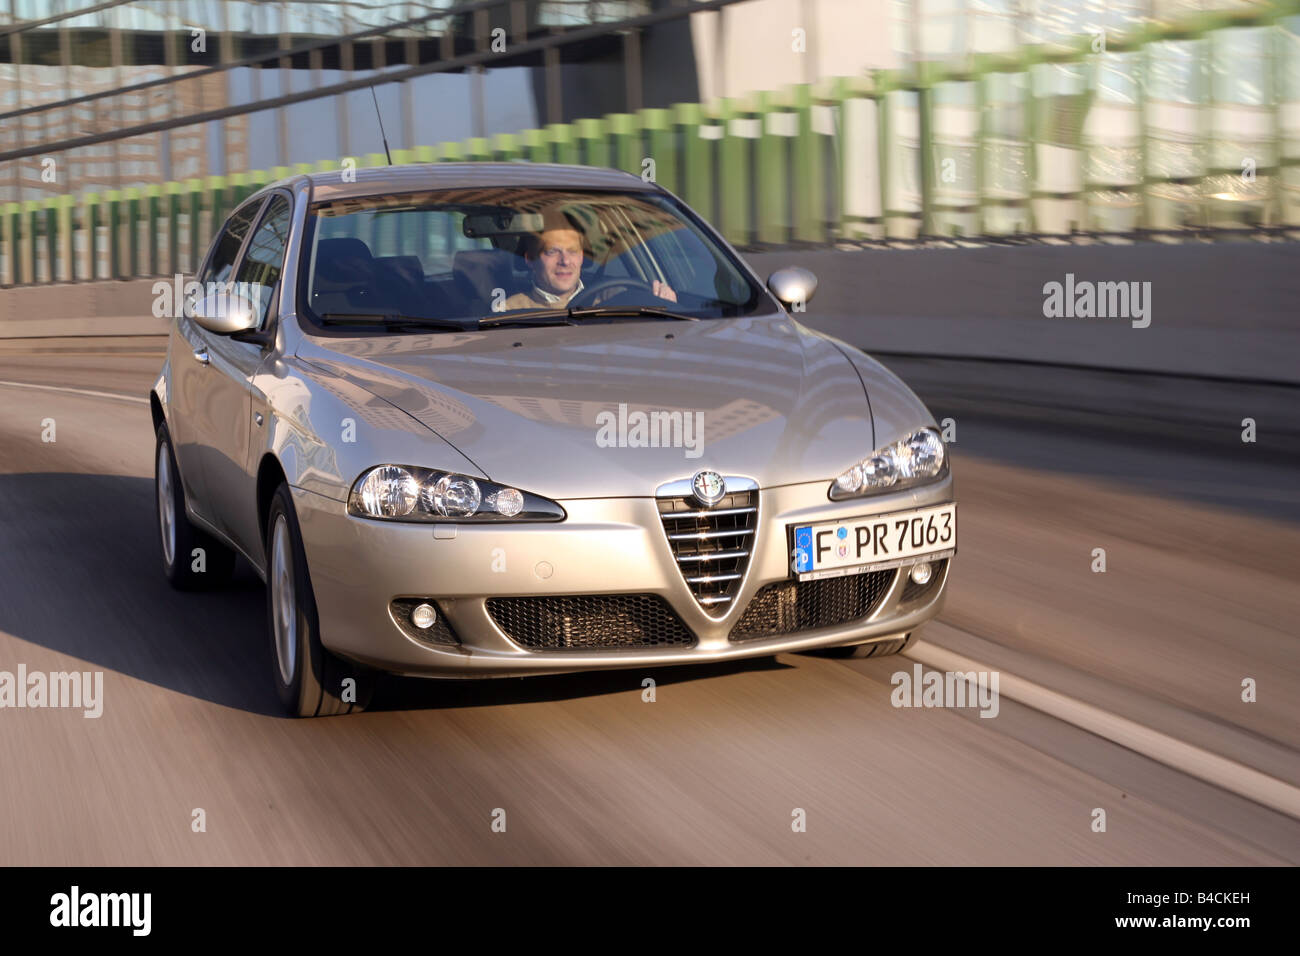 Alfa Romeo 147 1.9 JTD 16 V Distinctive, model year 2004-, silver, driving, diagonal from the front, frontal view, City Stock Photo